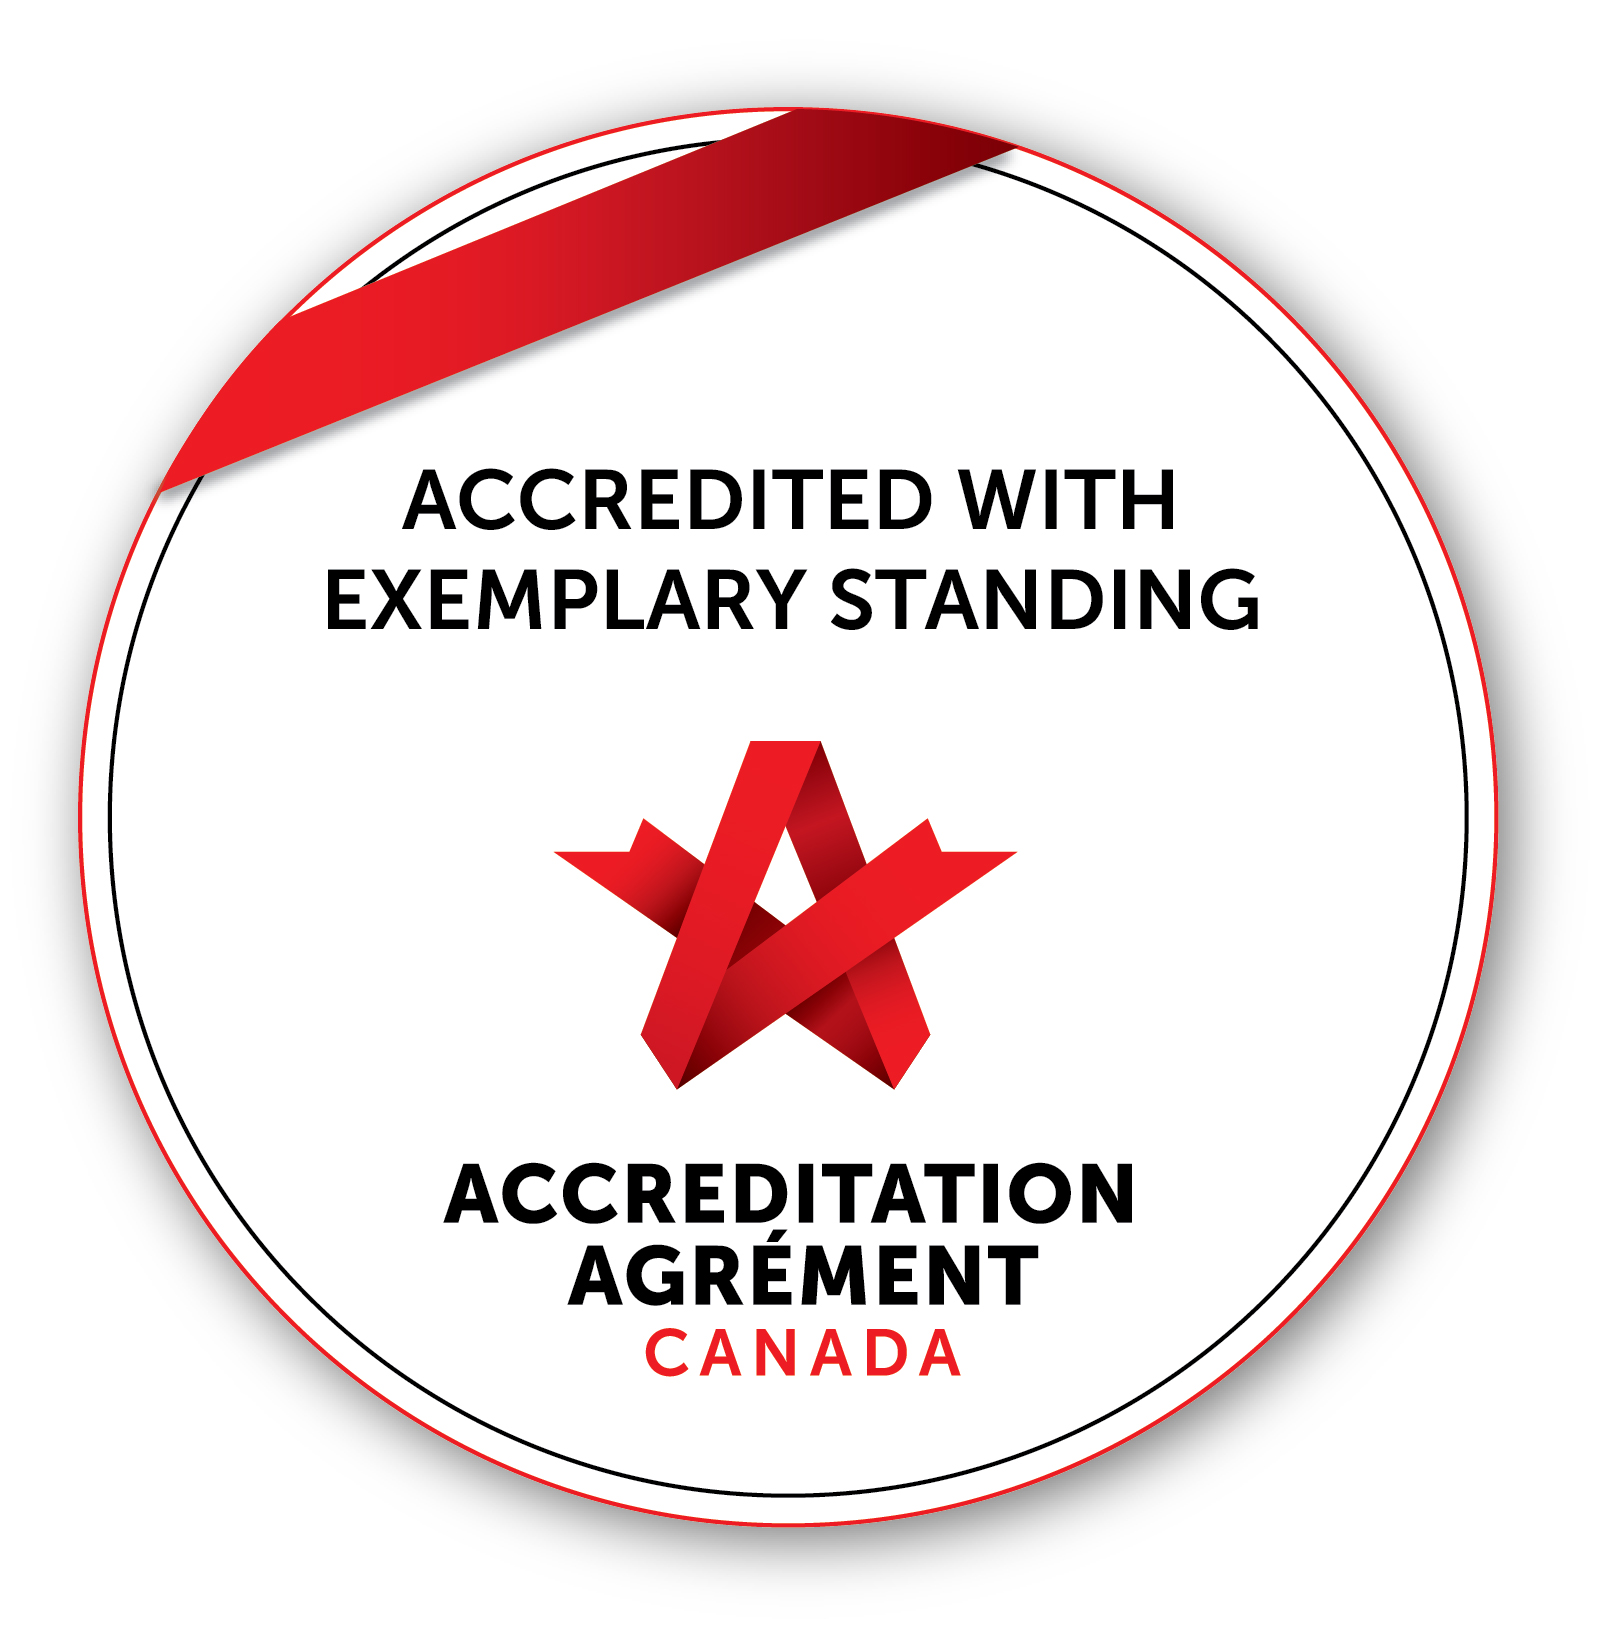 accreditation with exemplary standing logo